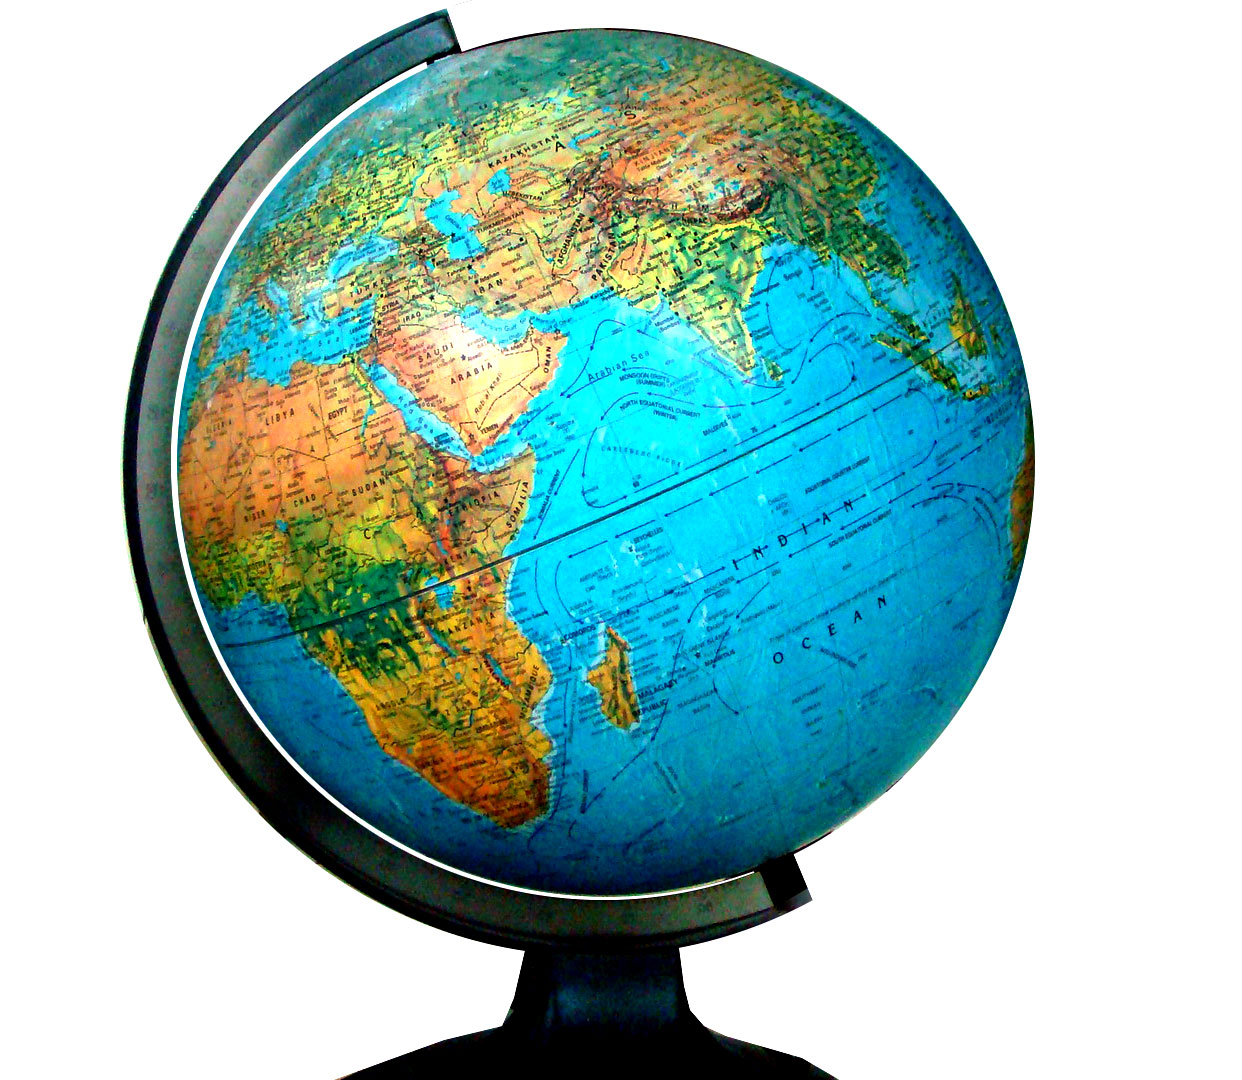 a globe depicting the countries of the world